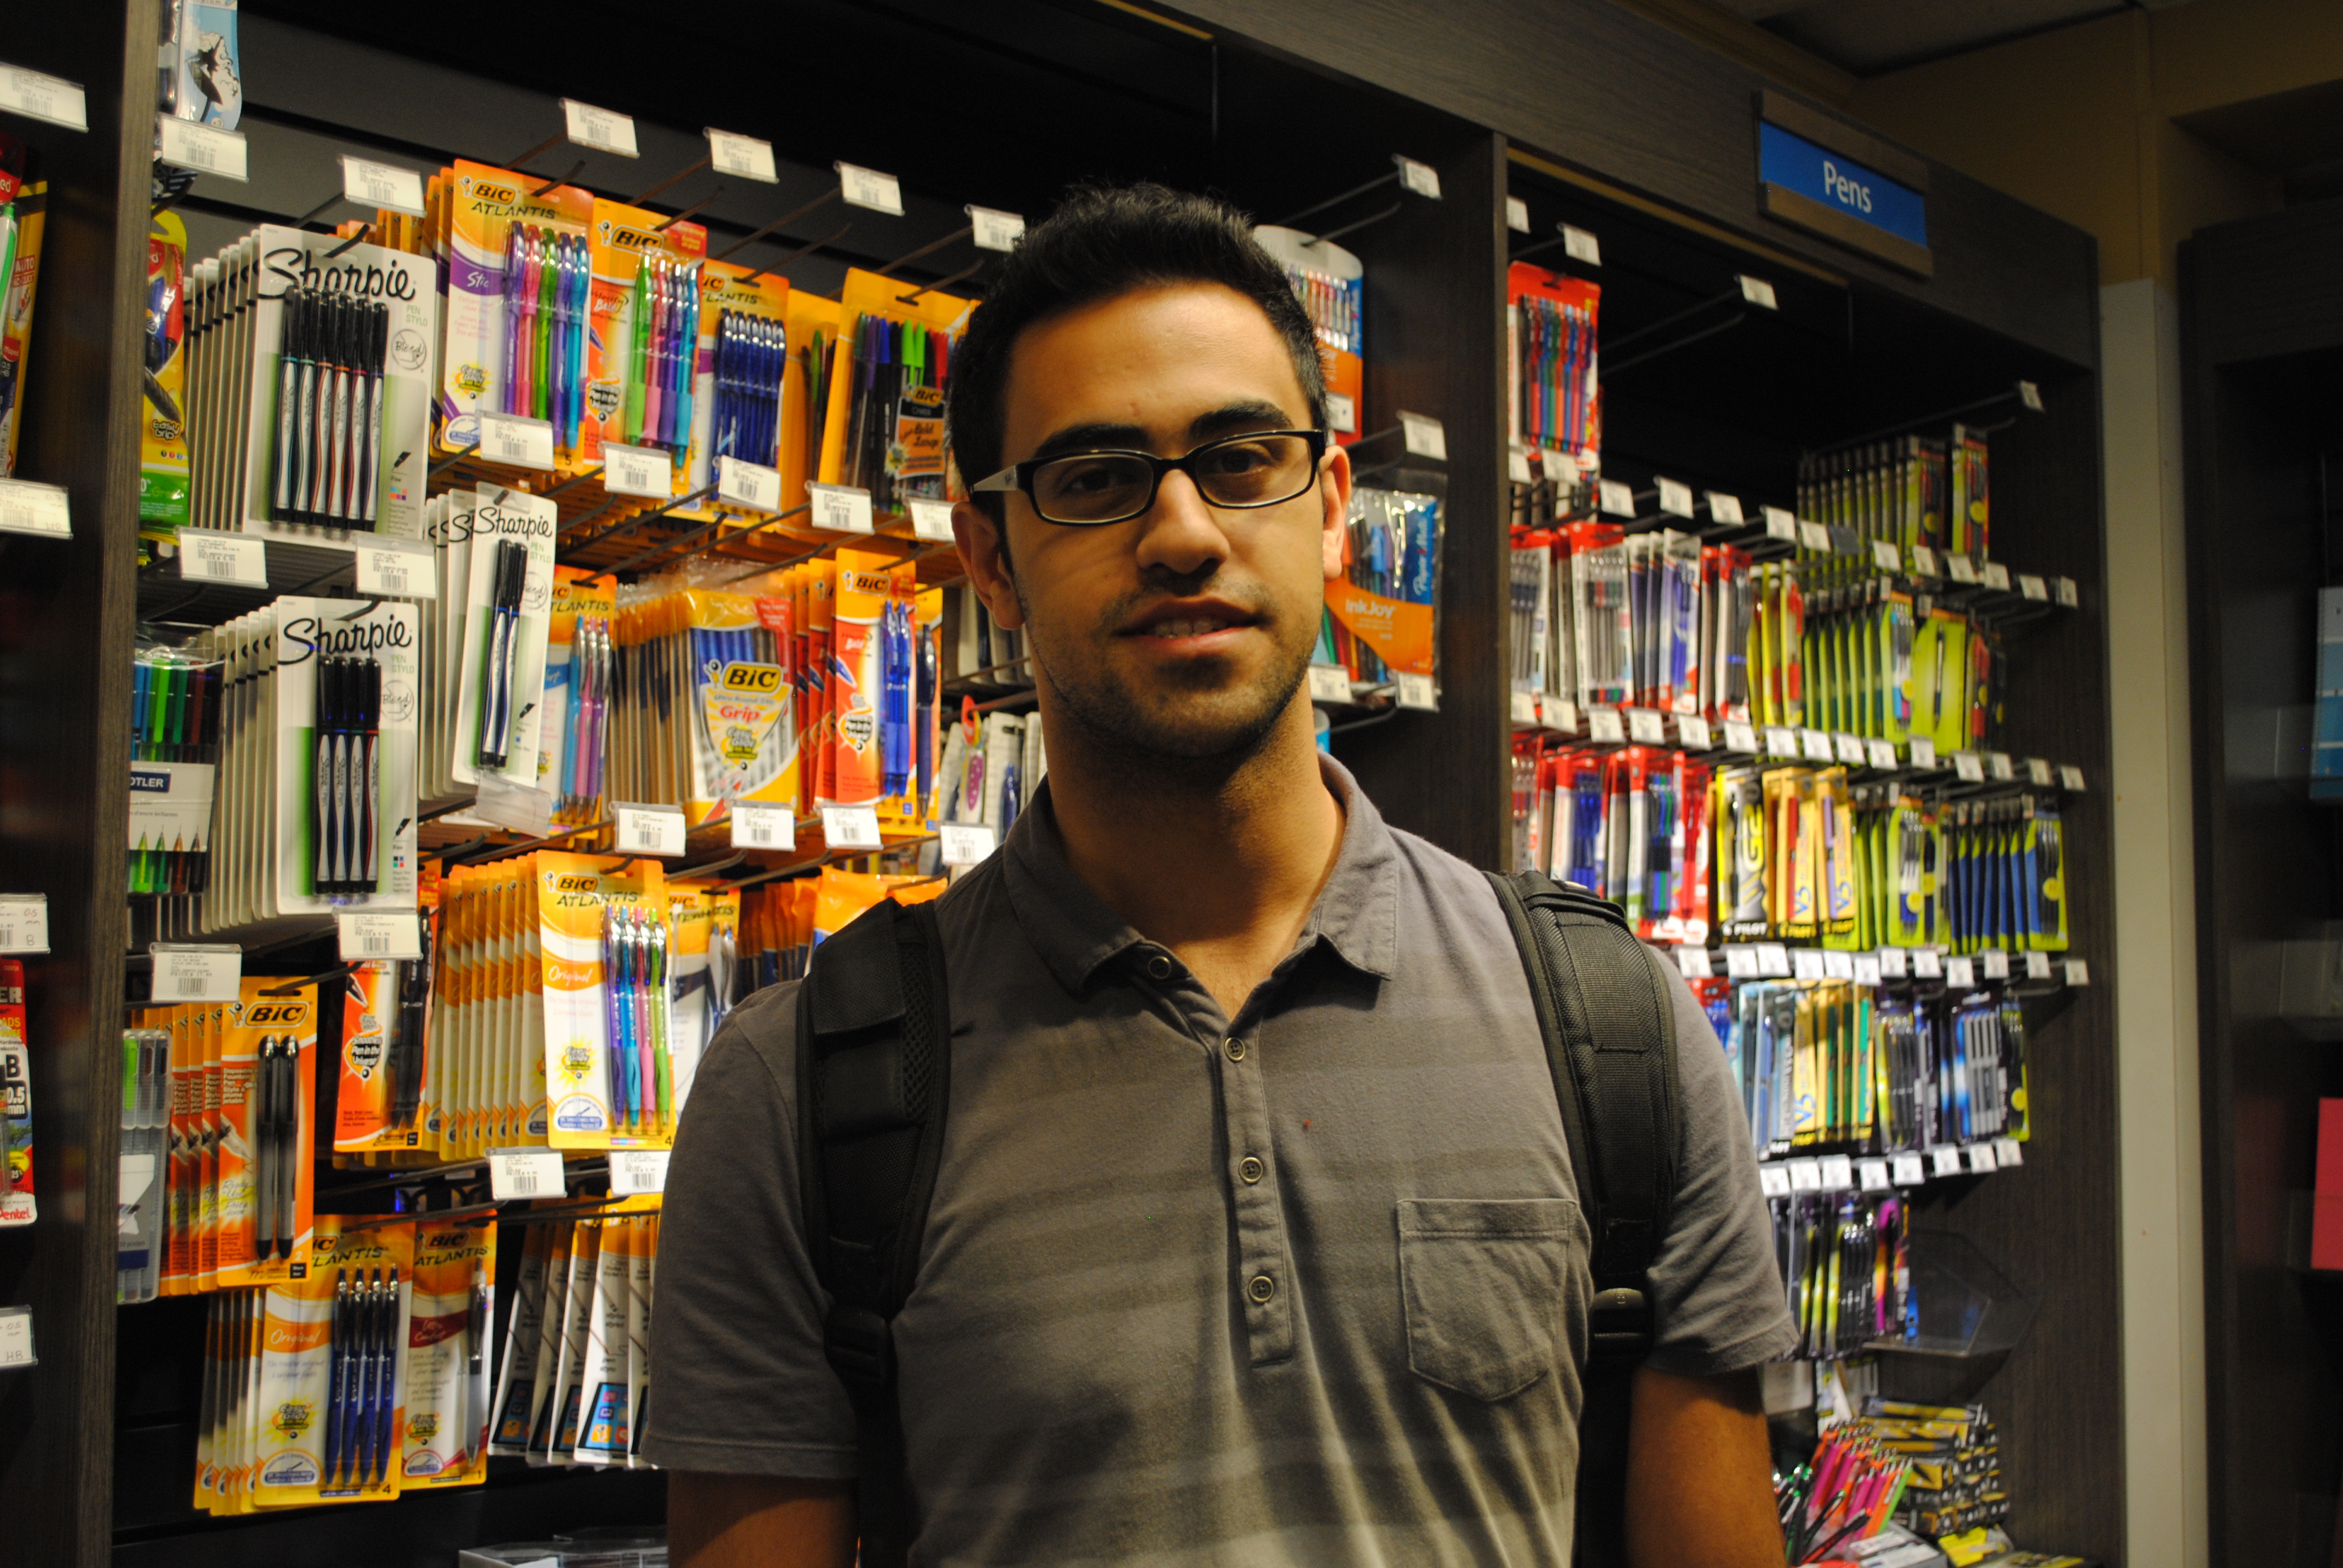 Amirali, in front of the stationary wall at the Bookstore.